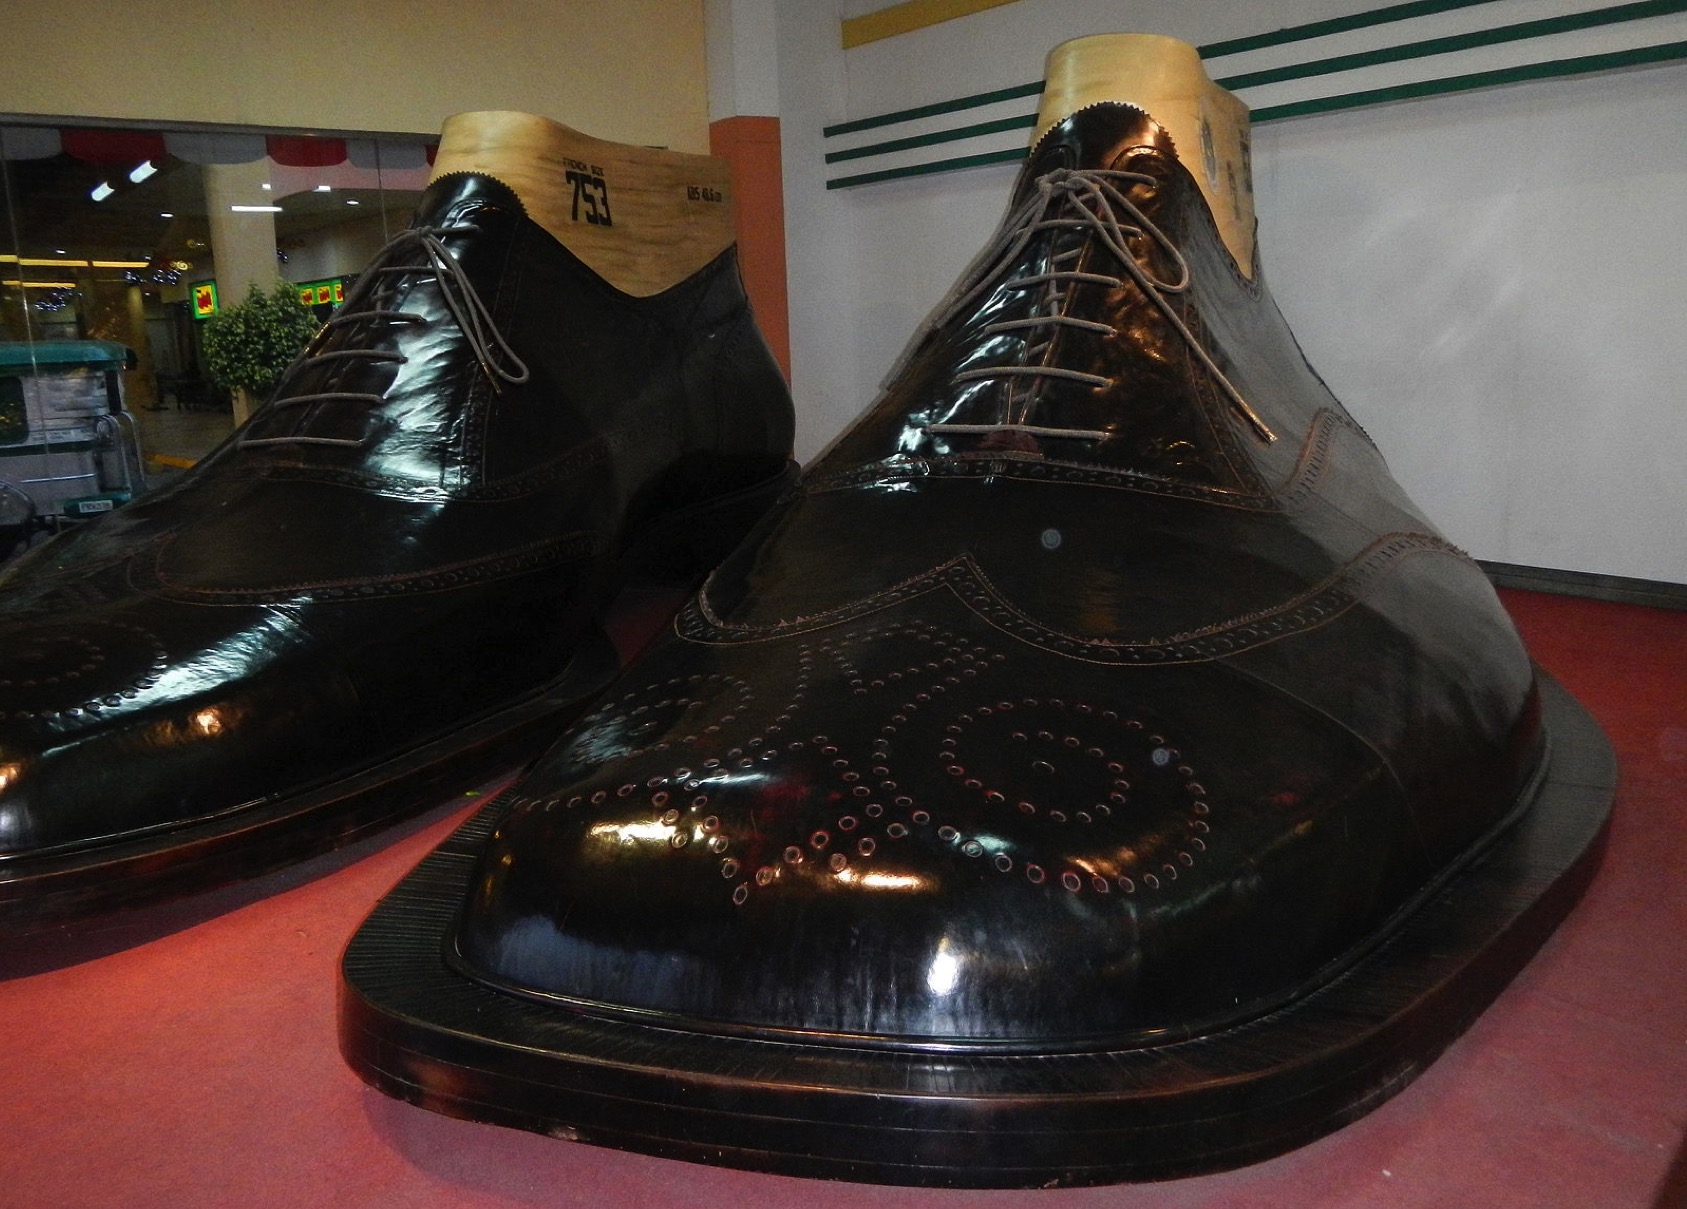 WORLD’S LARGEST PAIR OF SHOES – Pinoy Stop